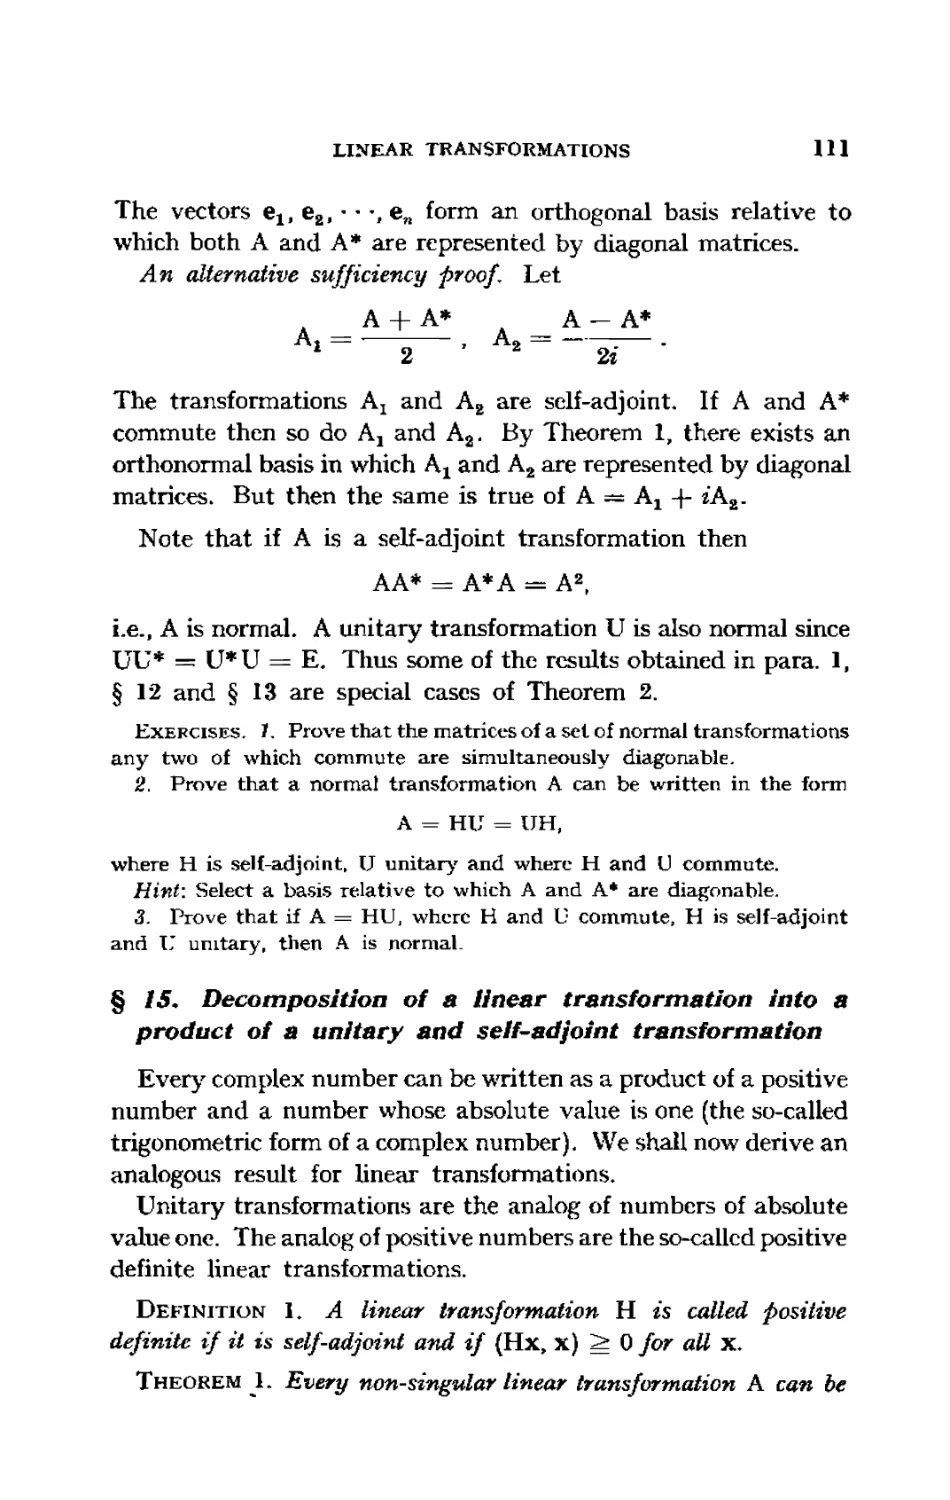 §15. Decomposition of a linear transformation into a product of a unitary and self-adjoint transformation